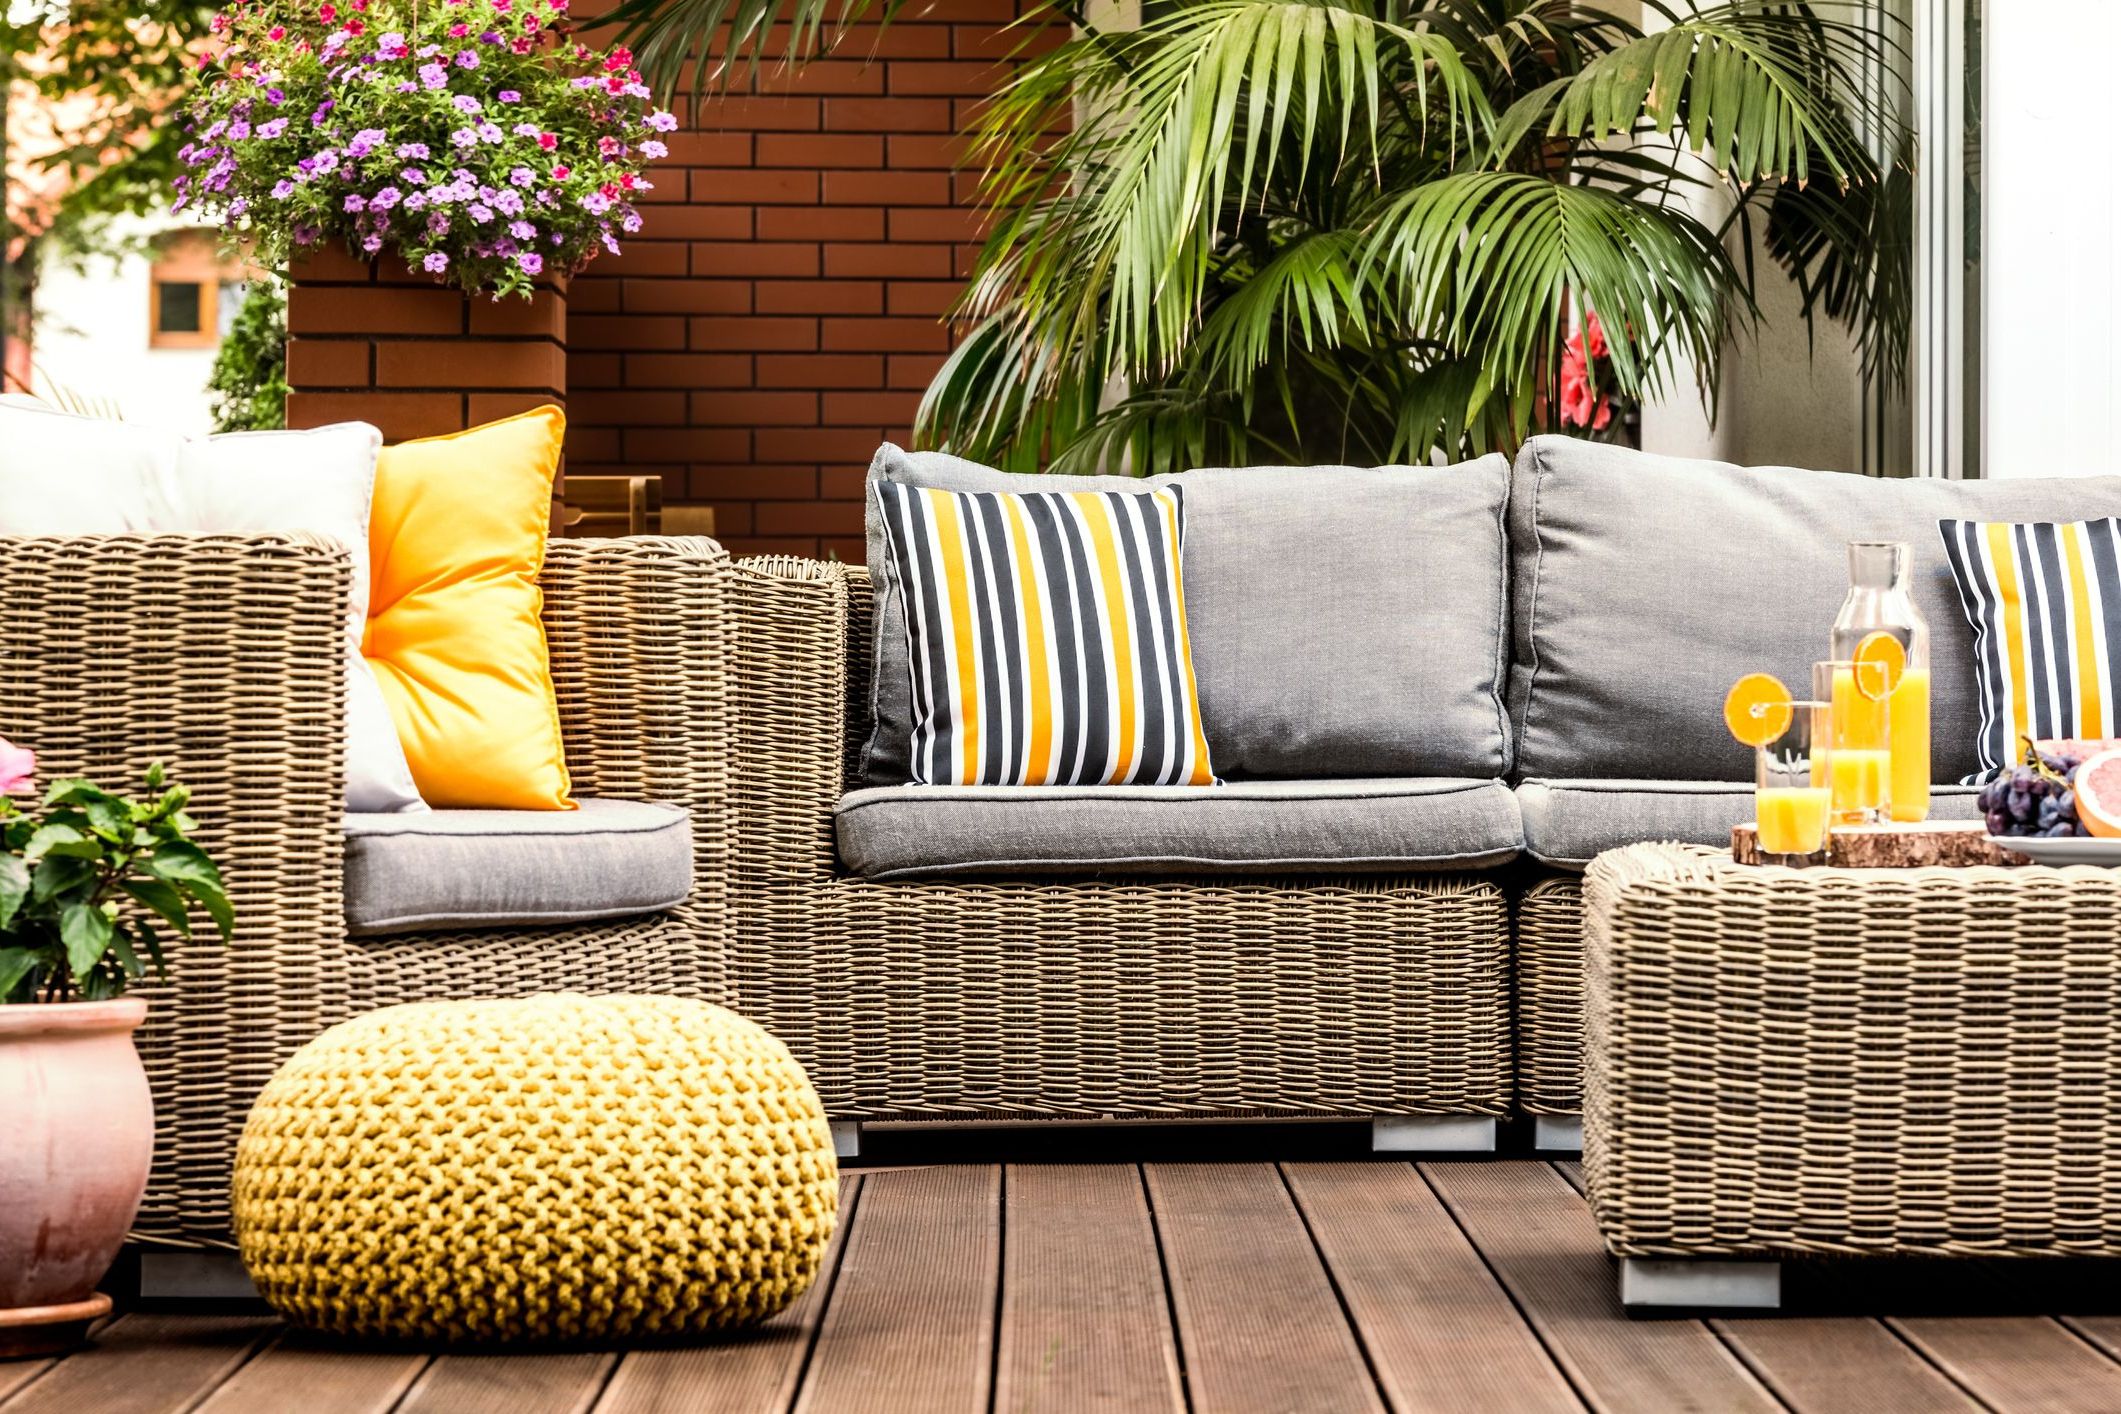 14 Outdoor Cushions To Spruce Up Your Garden Furniture For Most Recent Balcony And Deck With Soft Cushions (View 6 of 15)